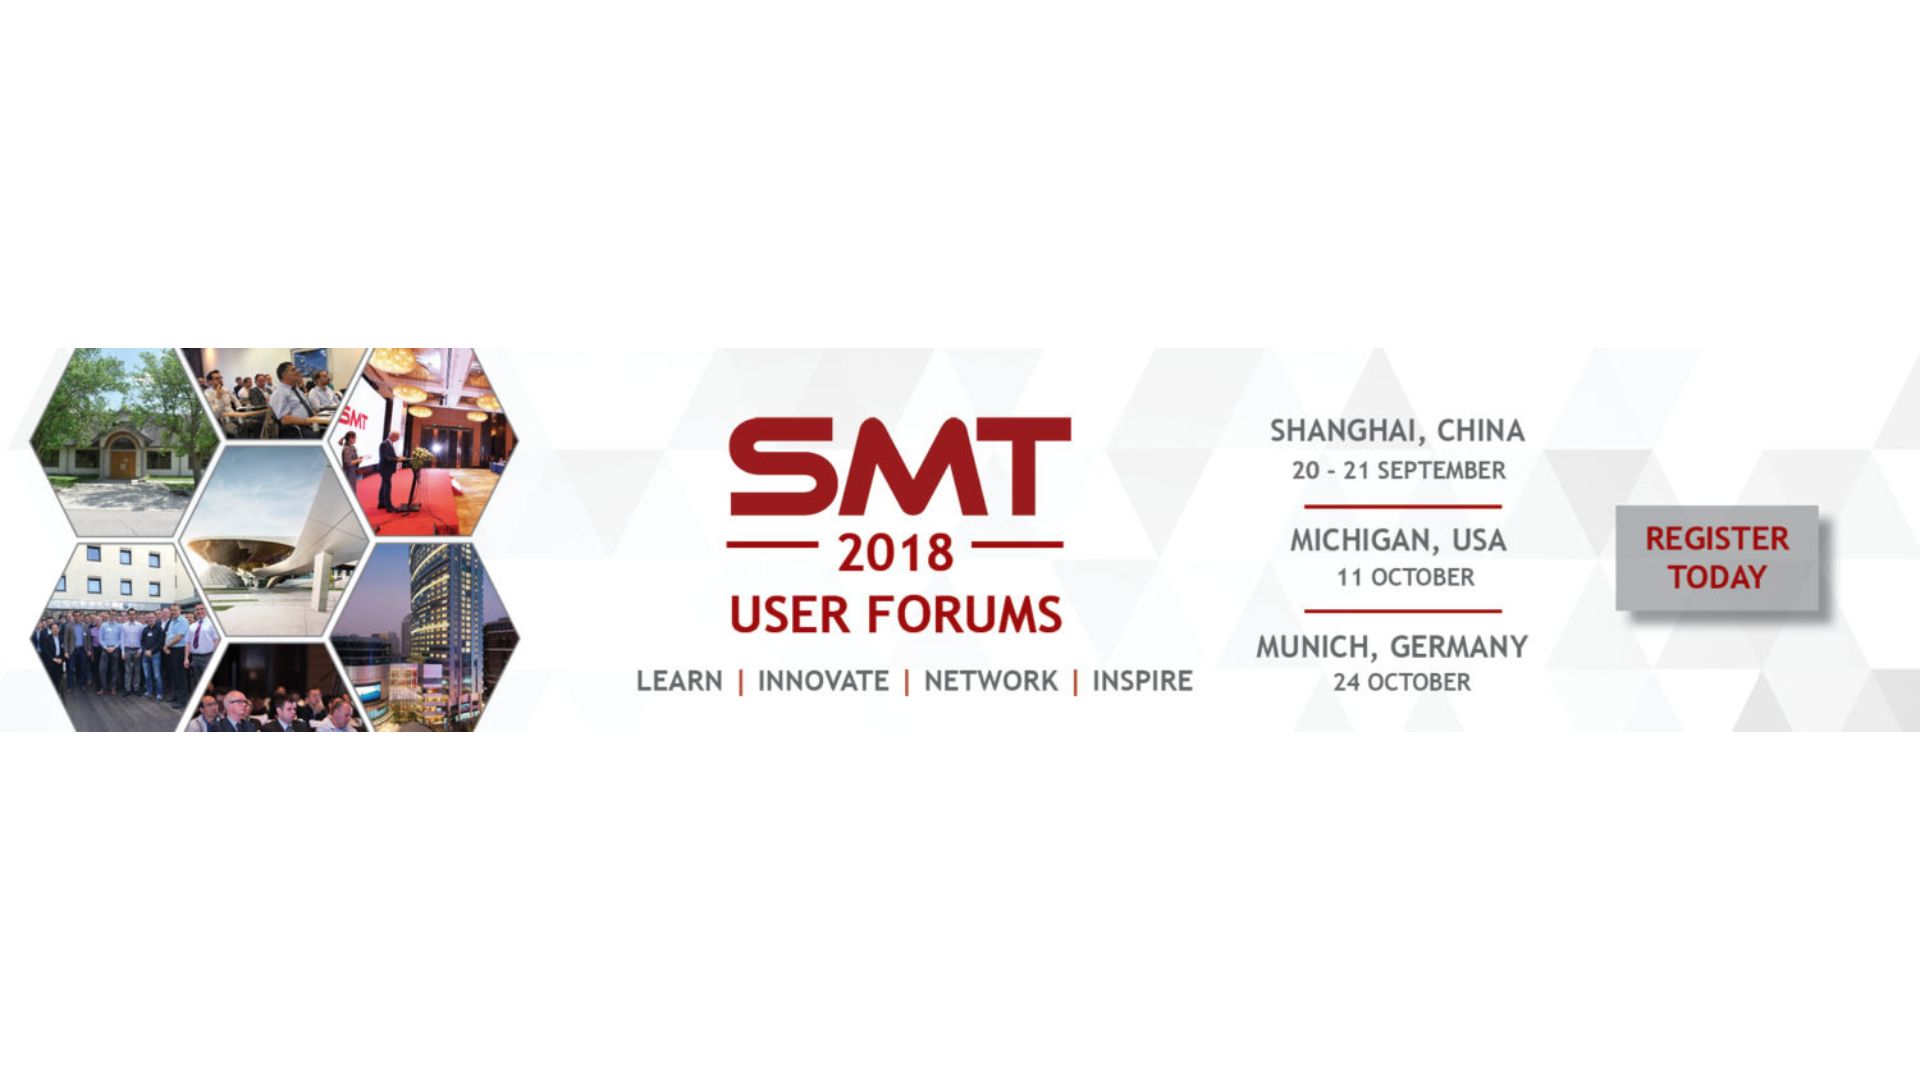 2018 user forum dates for SMT in China, USA and Germany.